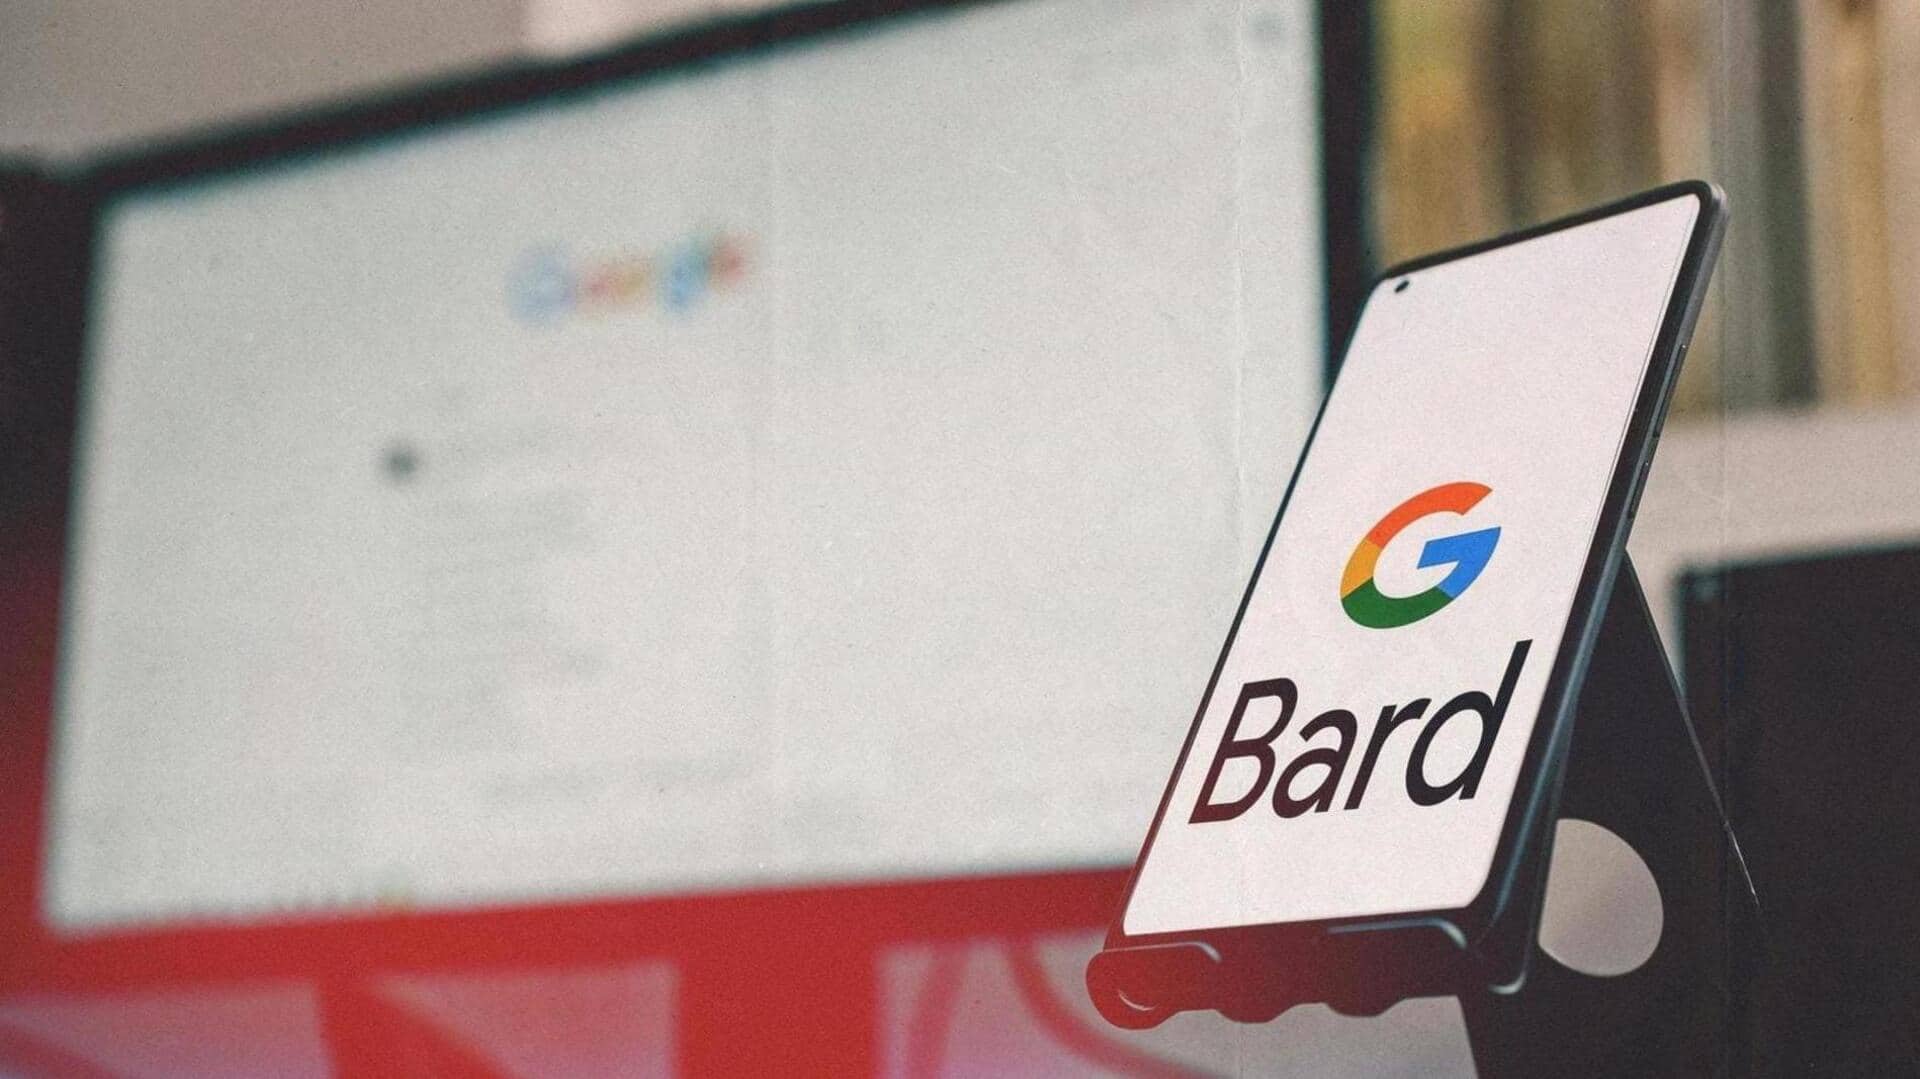 Google sues scammers spreading malware in name of Bard